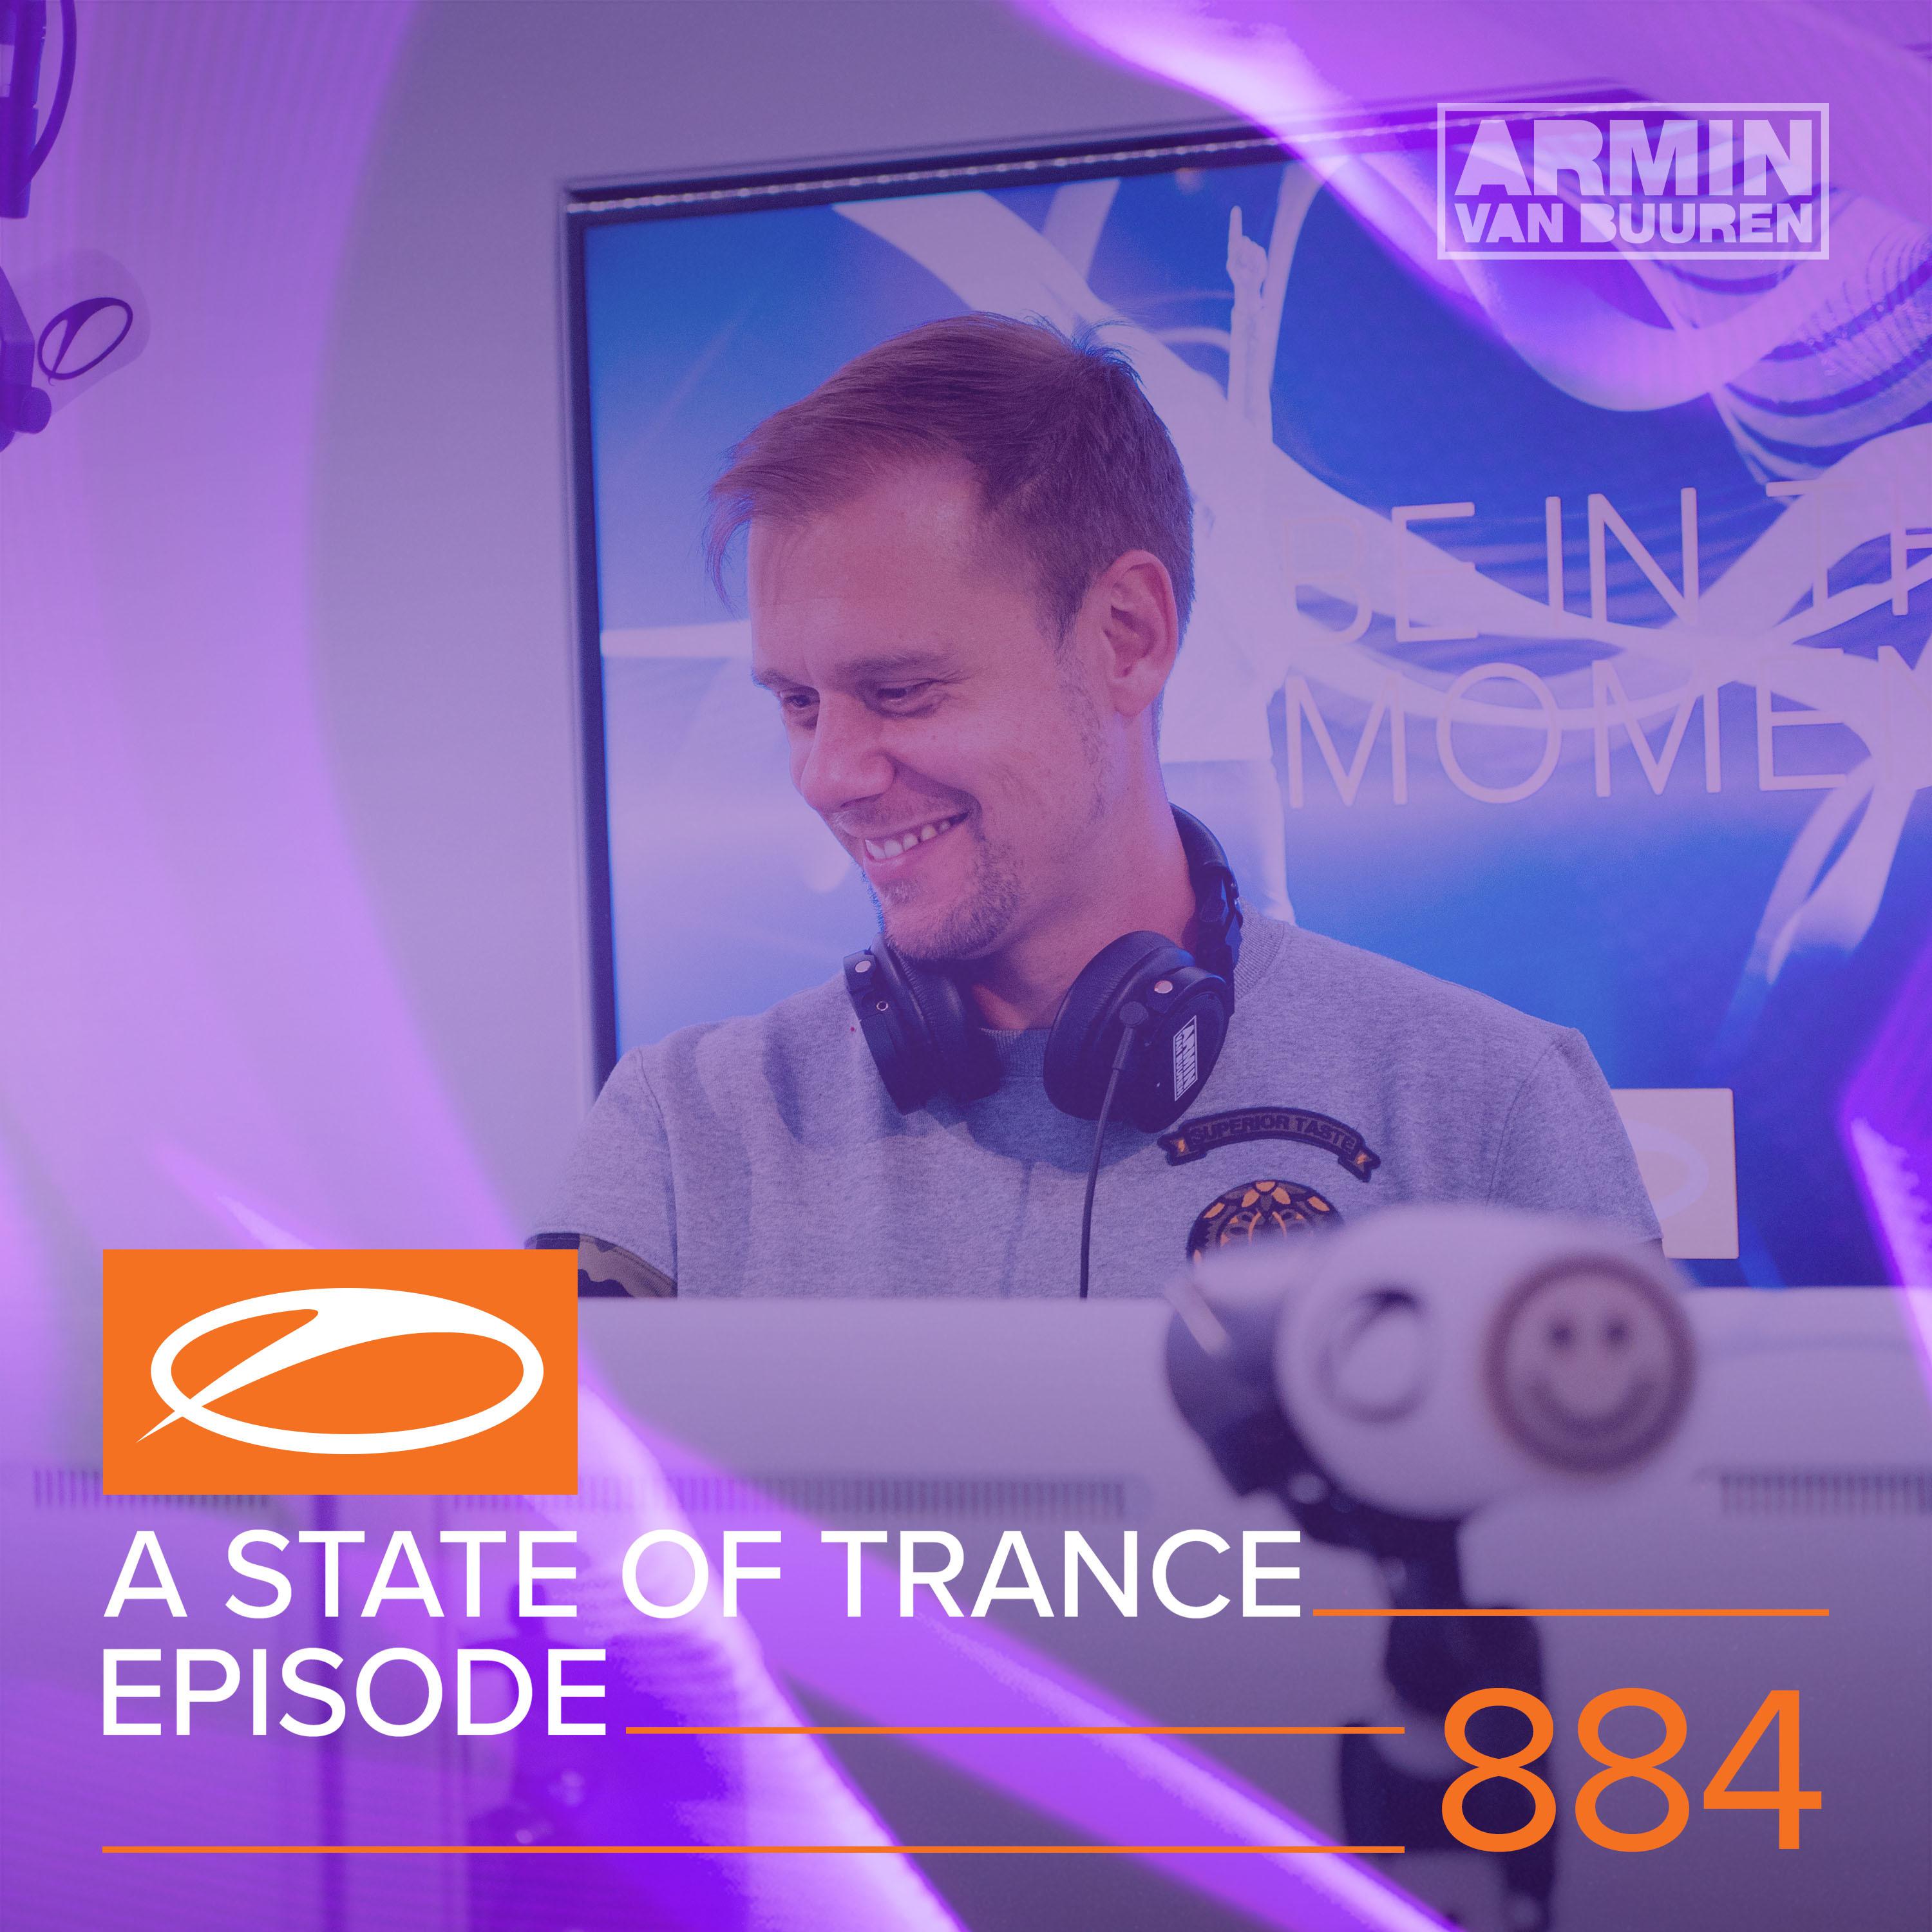 A State Of Trance (ASOT 884) (Coming Up, Pt. 2)